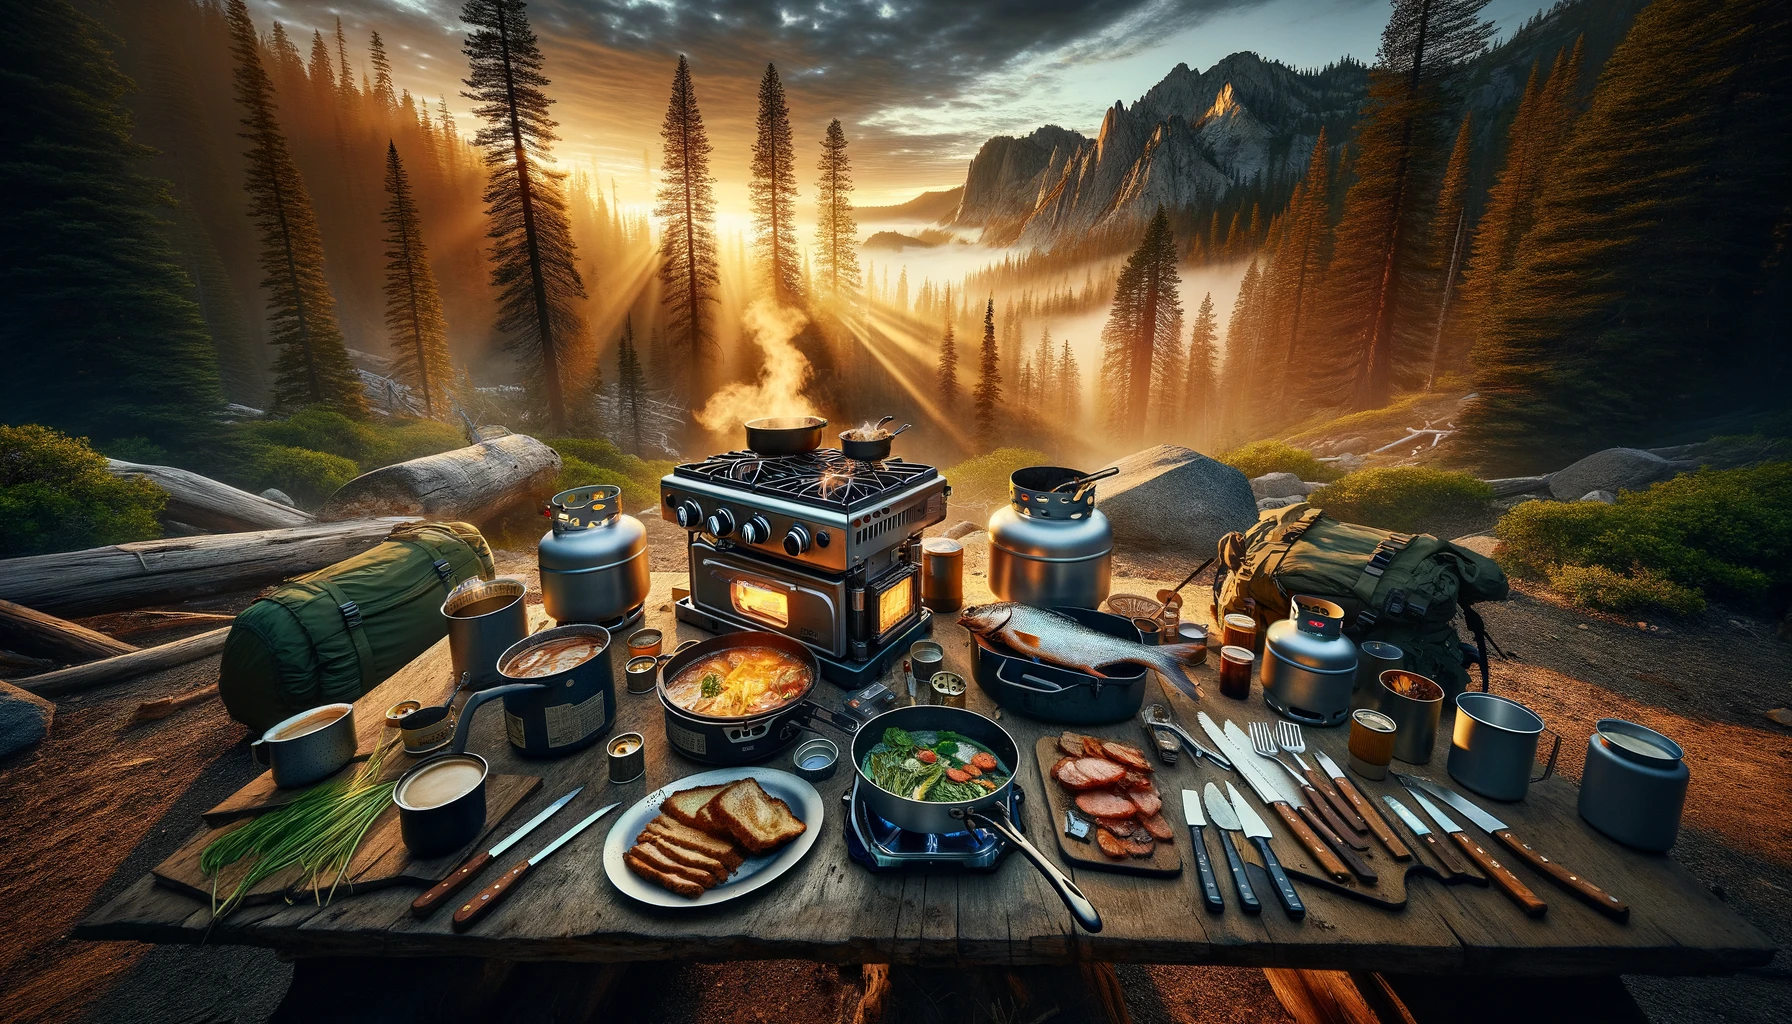 Adventurers gathered around a multi-burner propane stove in a rugged wilderness at dawn, showcasing off-grid cooking versatility with various meals being prepared, emphasizing the stove's reliability and the spirit of outdoor adventure